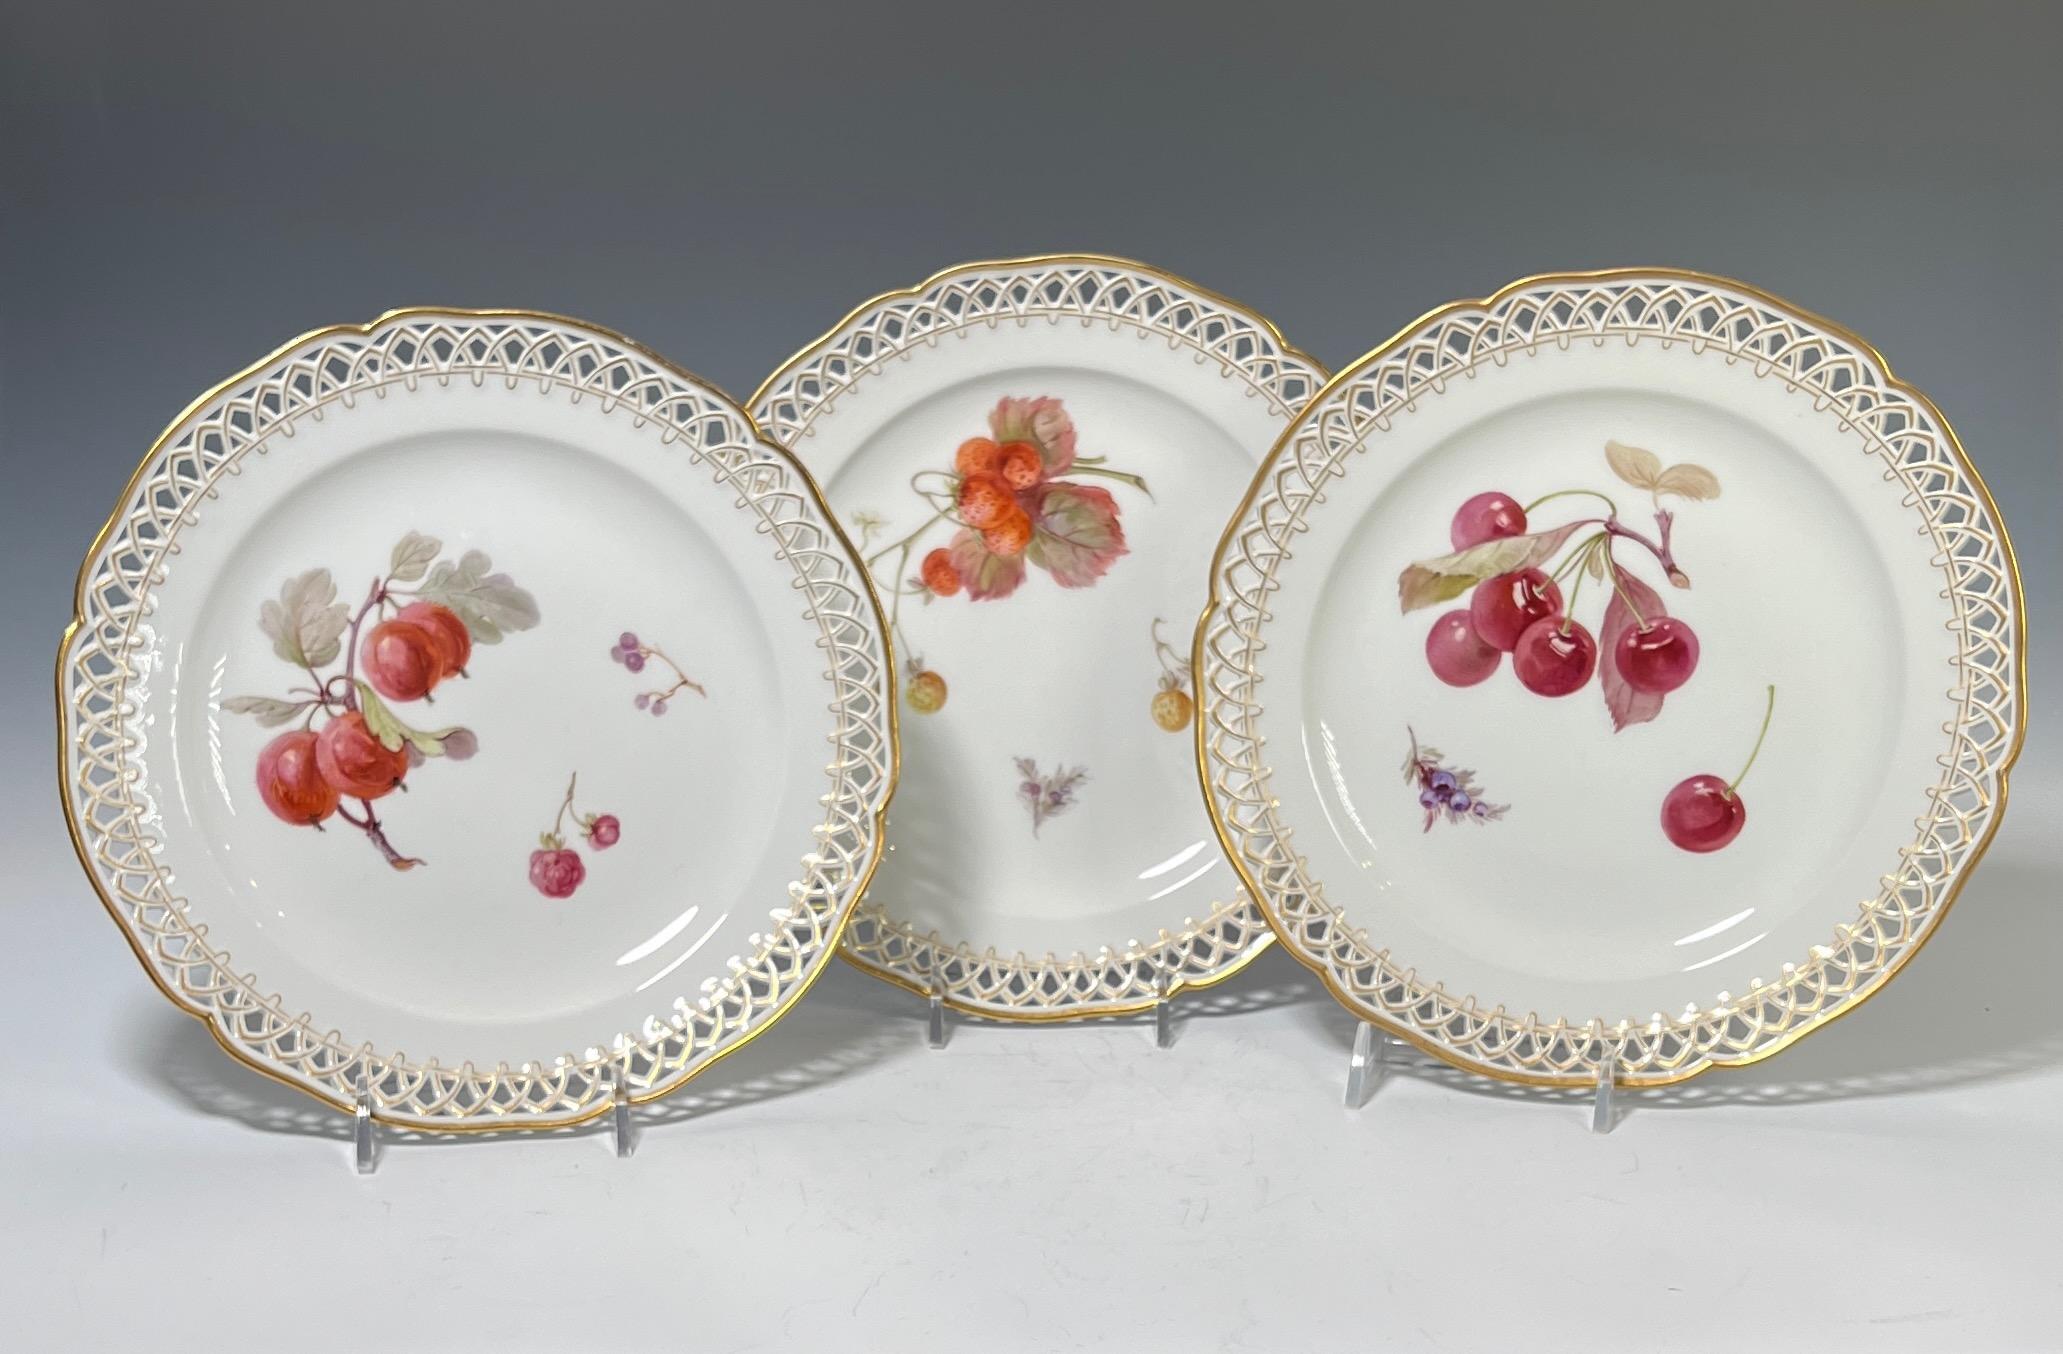 Set of 12 KPM Dessert Plates with Hand Painted Fruit Pierced & Gilt Borders In Excellent Condition For Sale In Great Barrington, MA